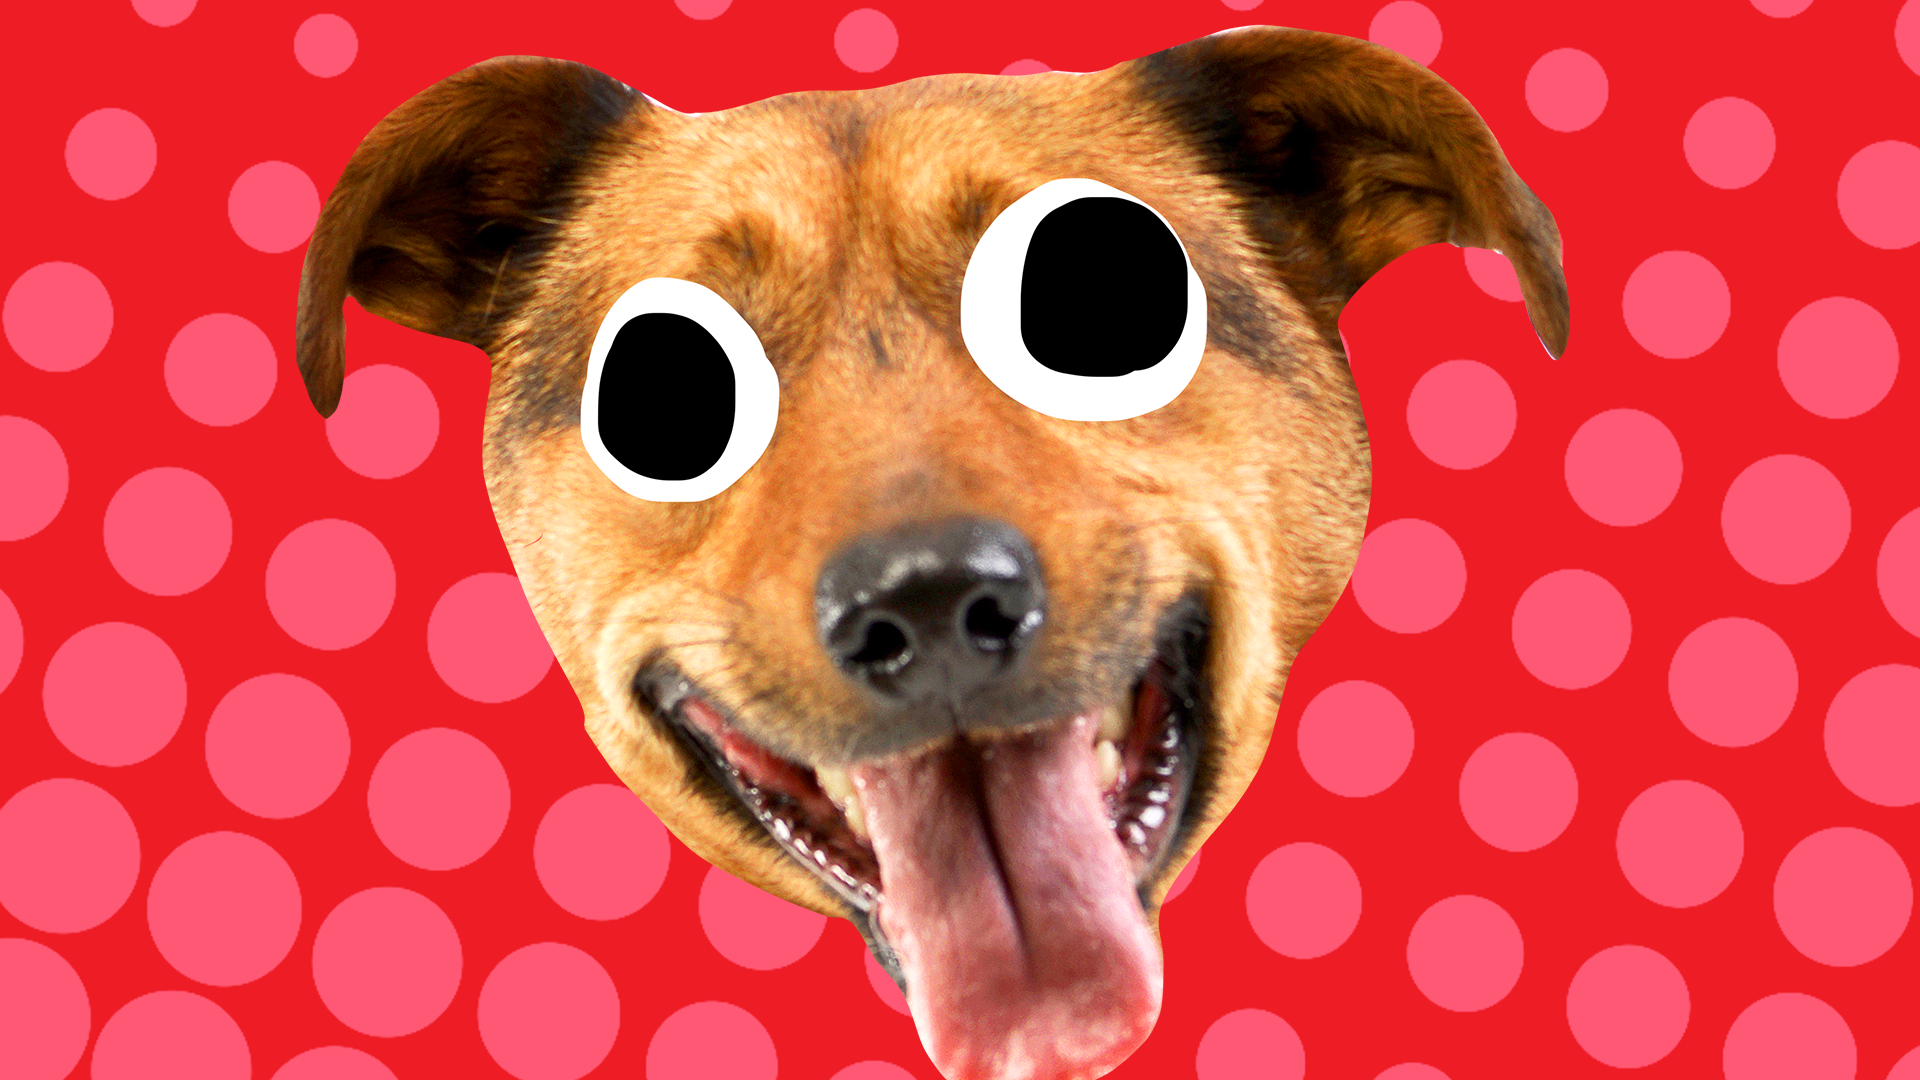 Happy dog face on red background